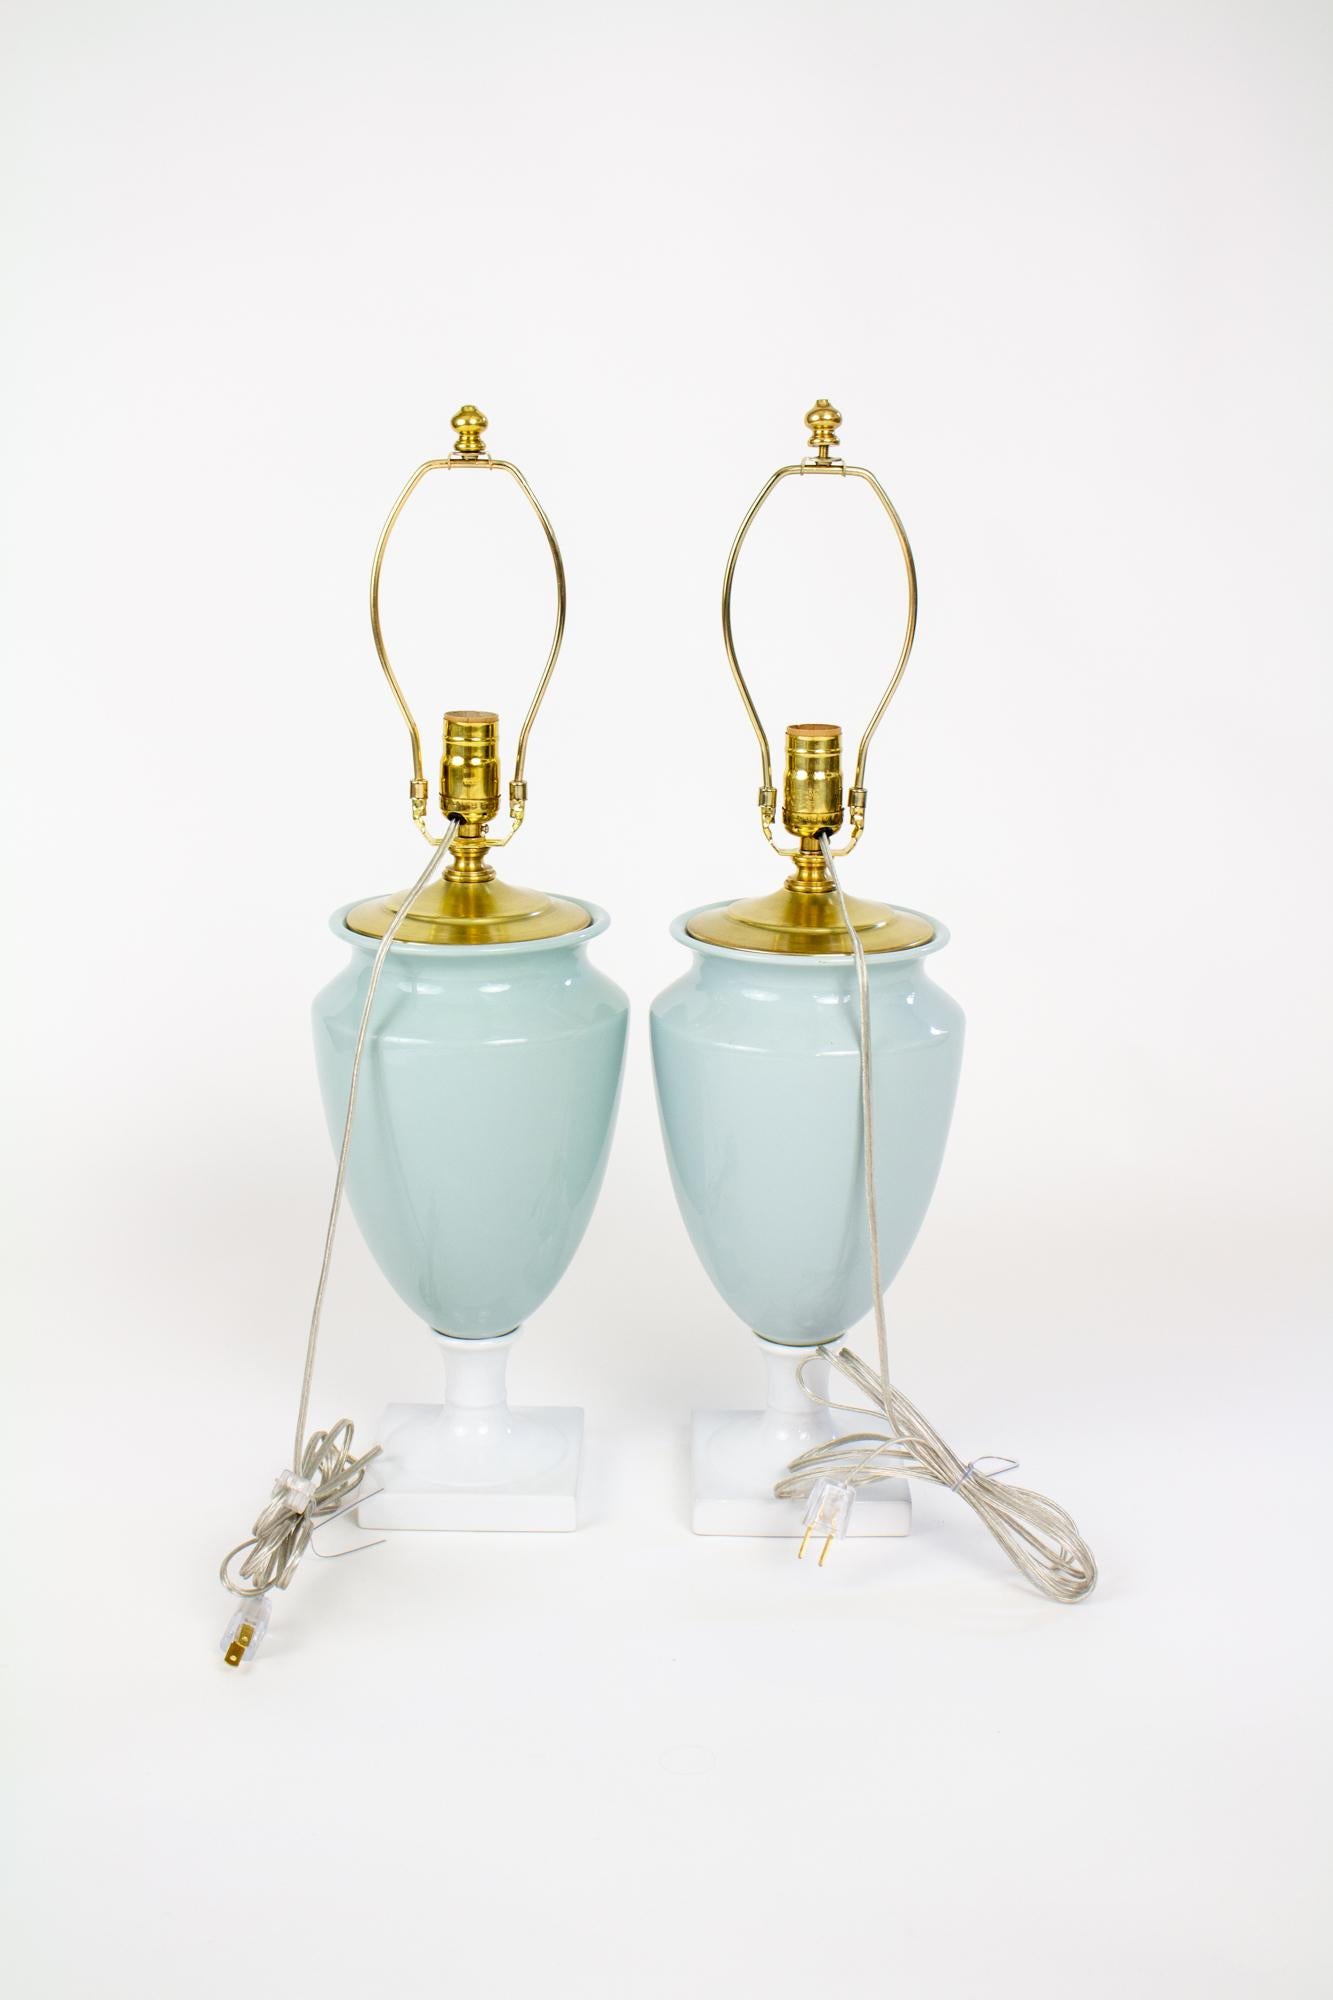 Neoclassical Revival Late 20th Century Celadon and White Porcelain Urn Table Lamps - a Pair For Sale